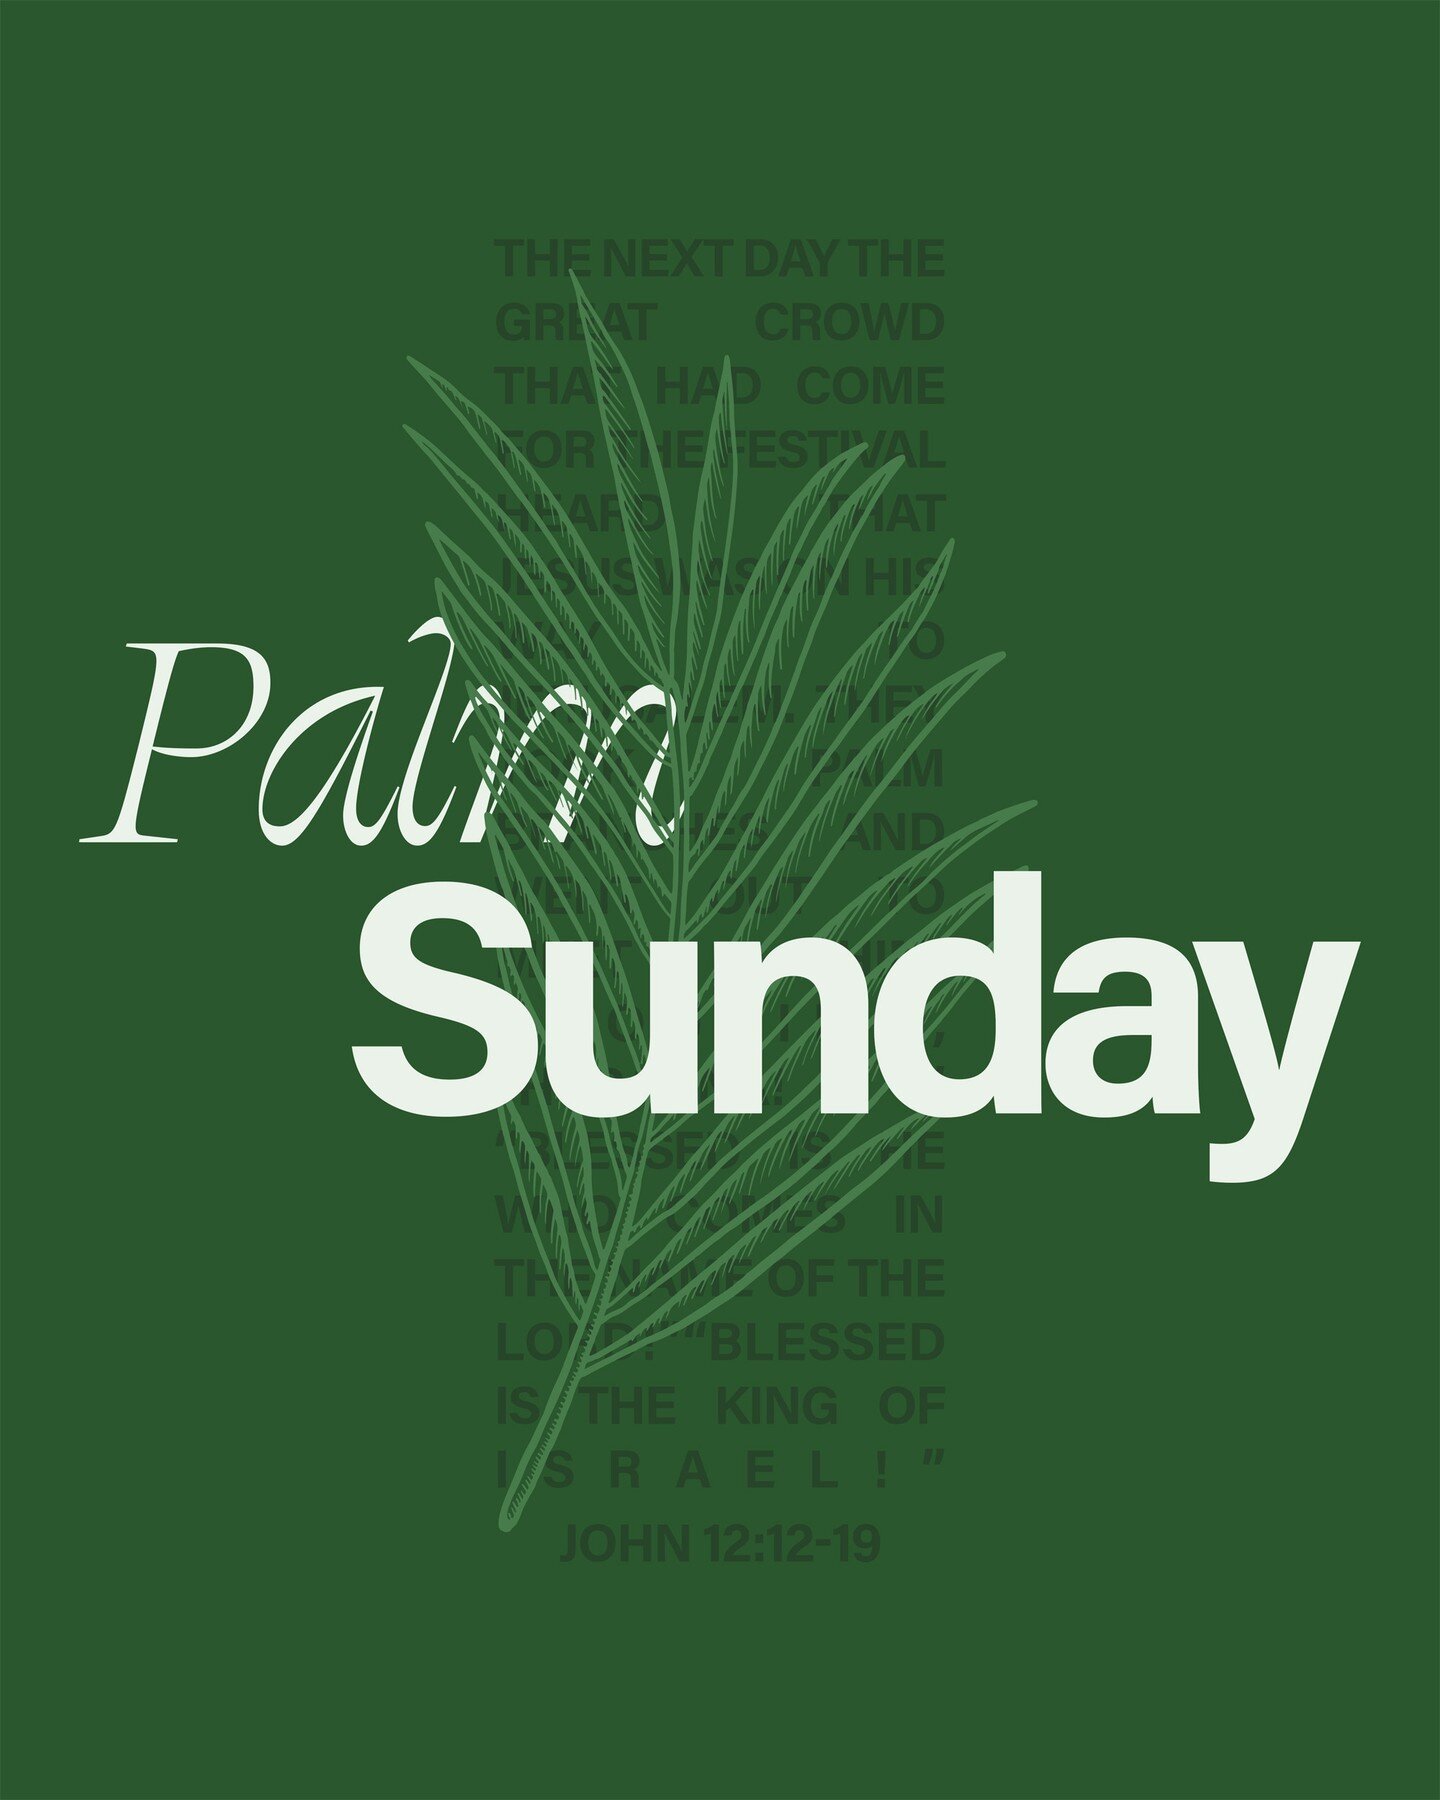 It's Palm sunday! Be a part of worship with us today as we celebrate Palm Sunday, the beginning of Holy Week. Let's reflect on Jesus' triumphant entry into Jerusalem and prepare our hearts for Easter. #PalmSunday #HolyWeek #Easter2024 🌿🙏